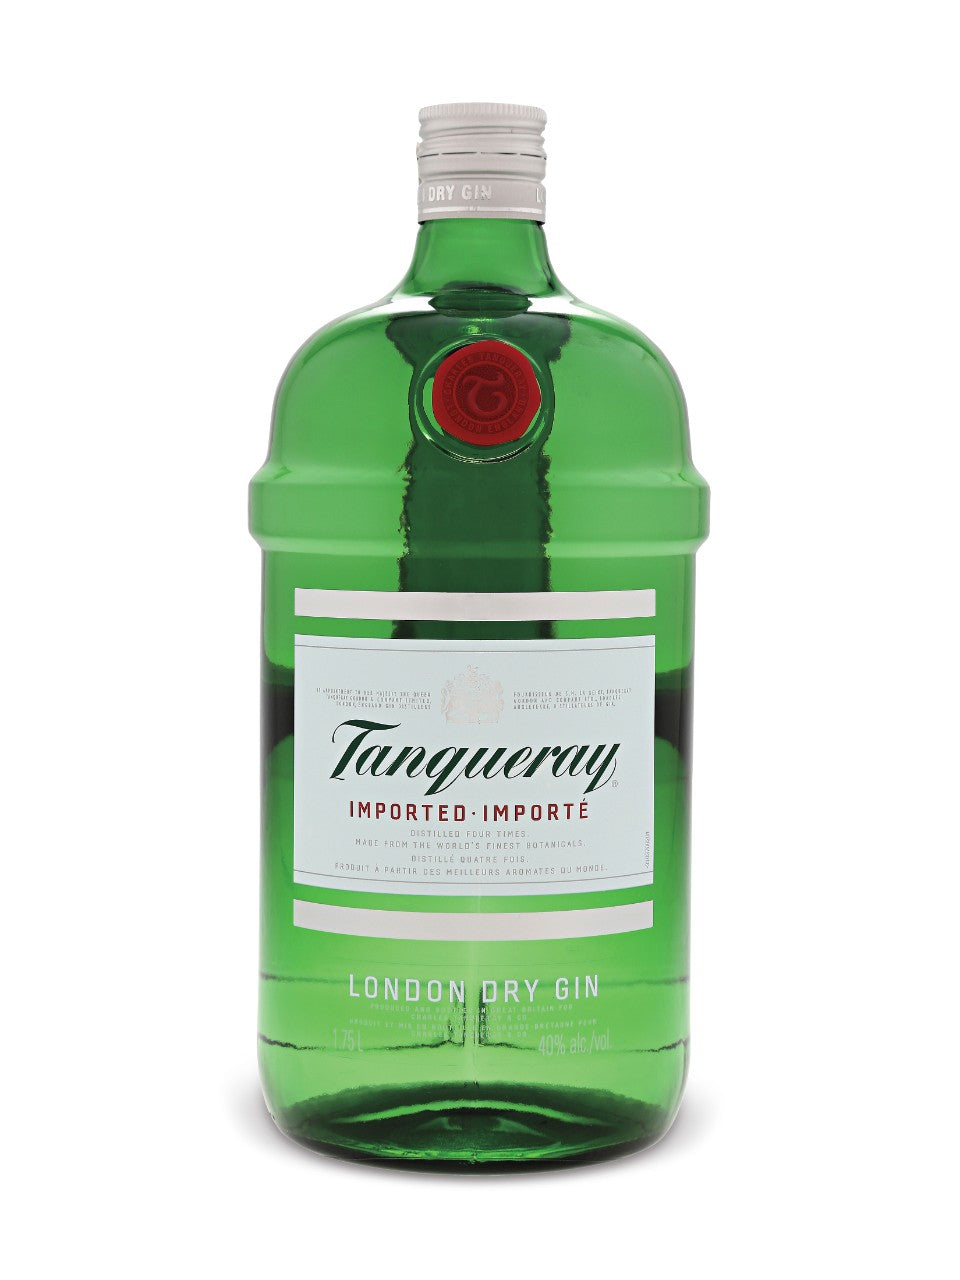 Tanqueray London Dry Gin 1750 mL bottle